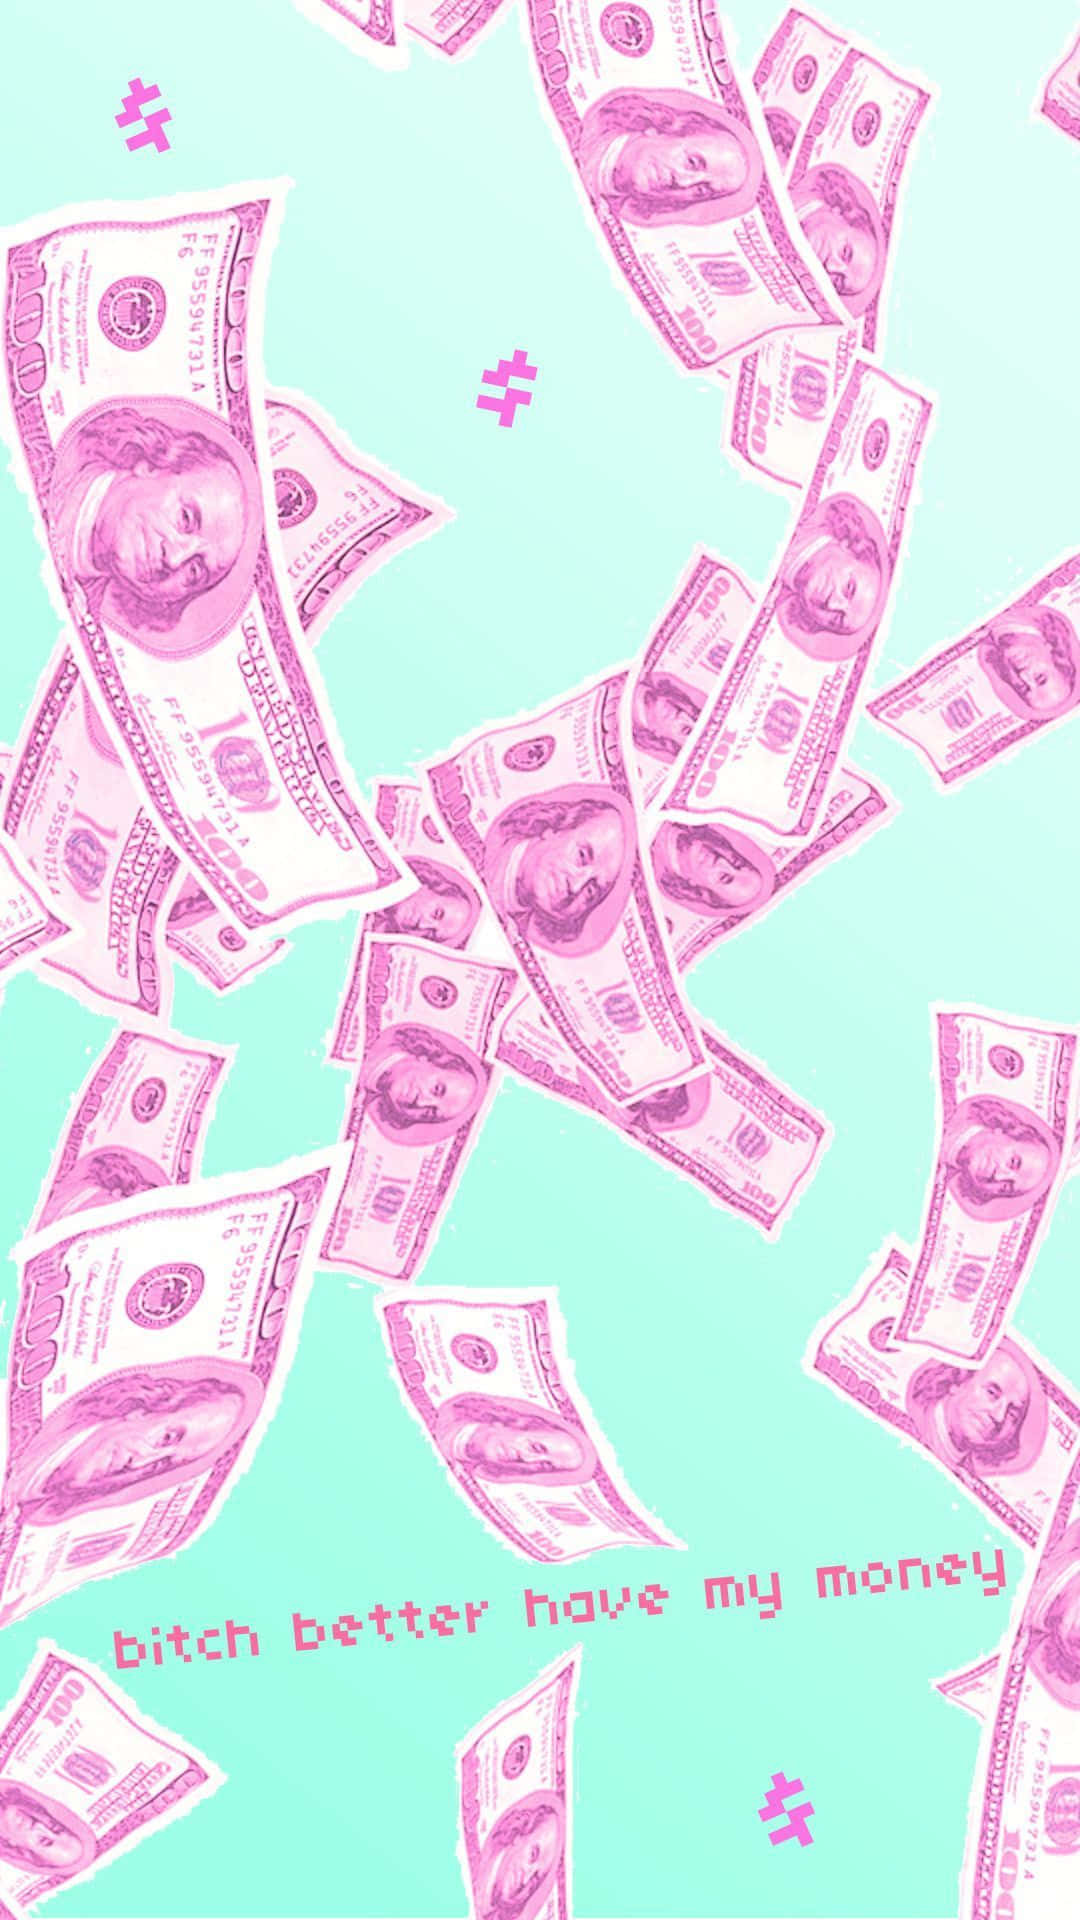 A Pink And Blue Background With Money Flying In The Air Background